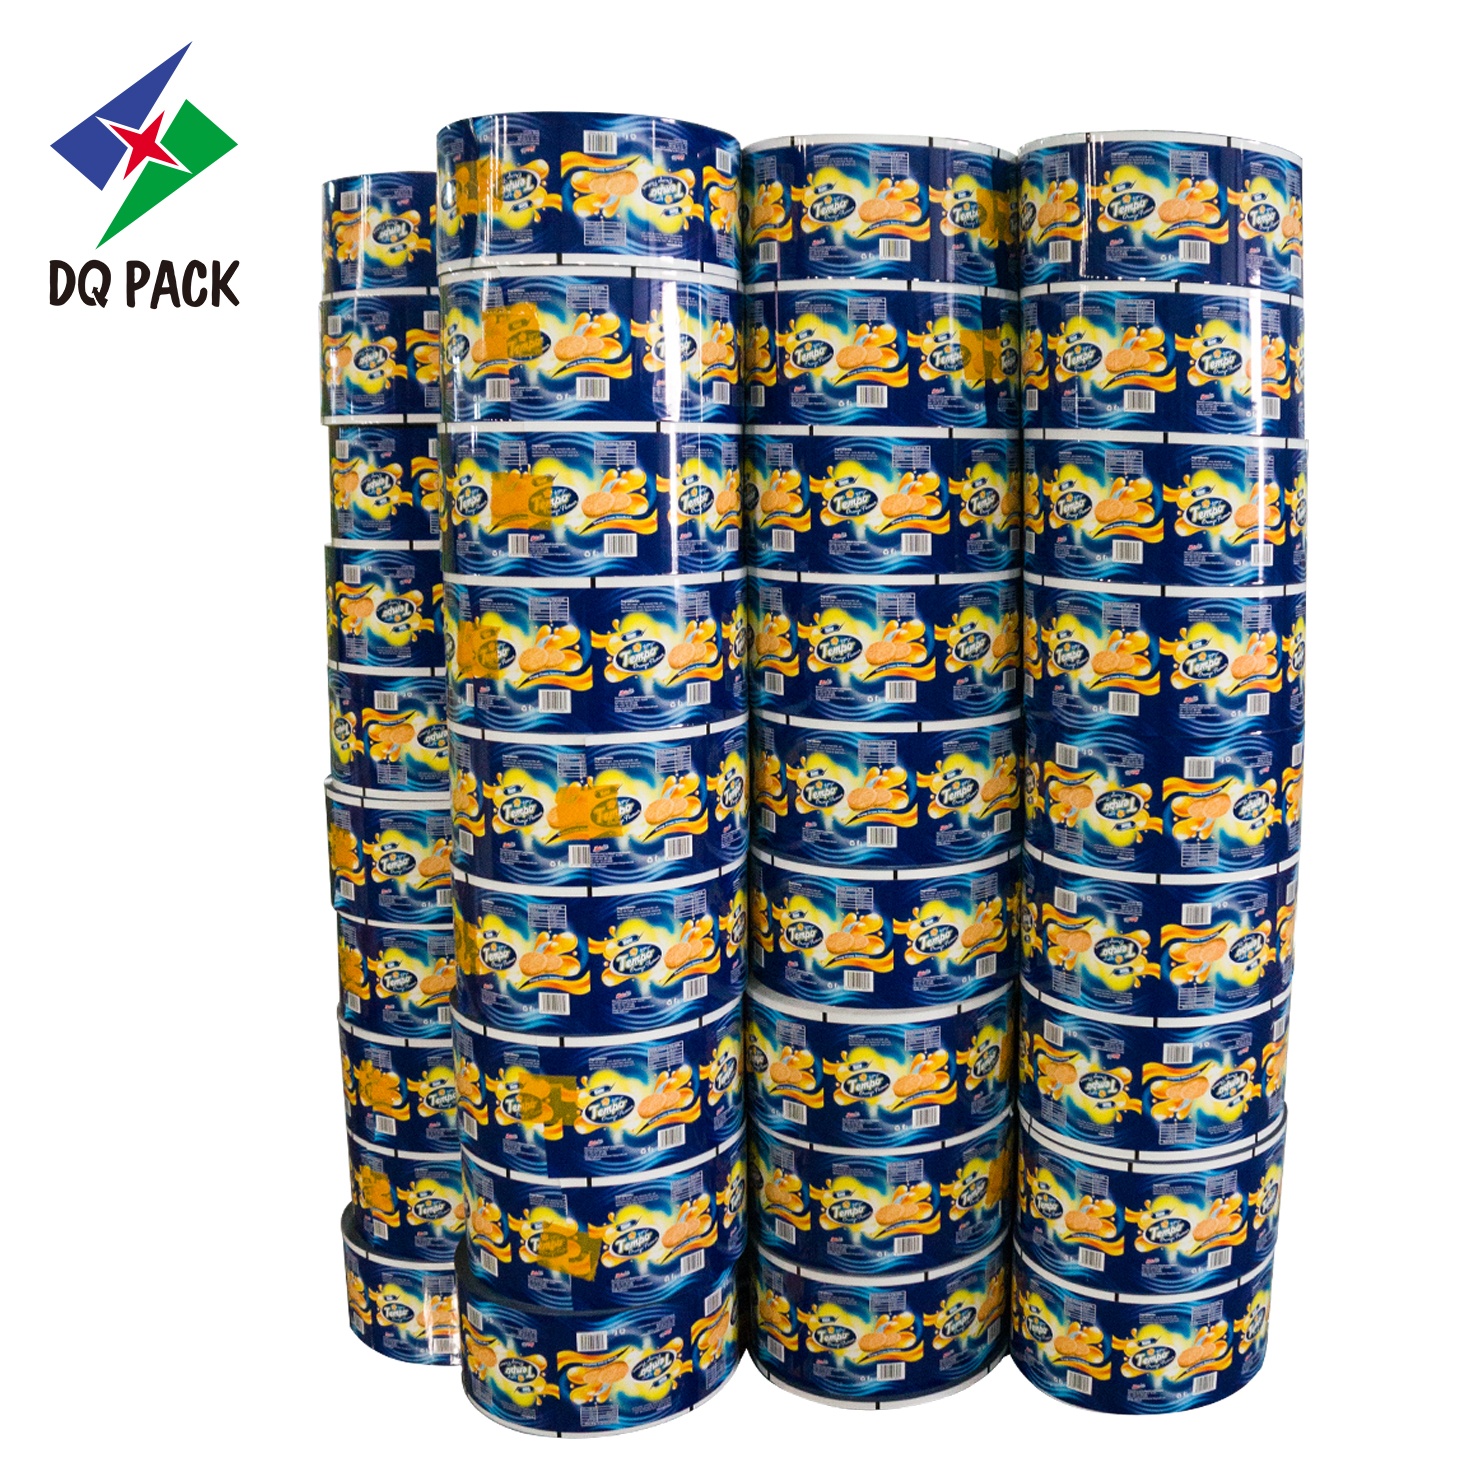 DQ PACK Hot Sale Heat Seal Laminated Biscuit Packaging Roll Film